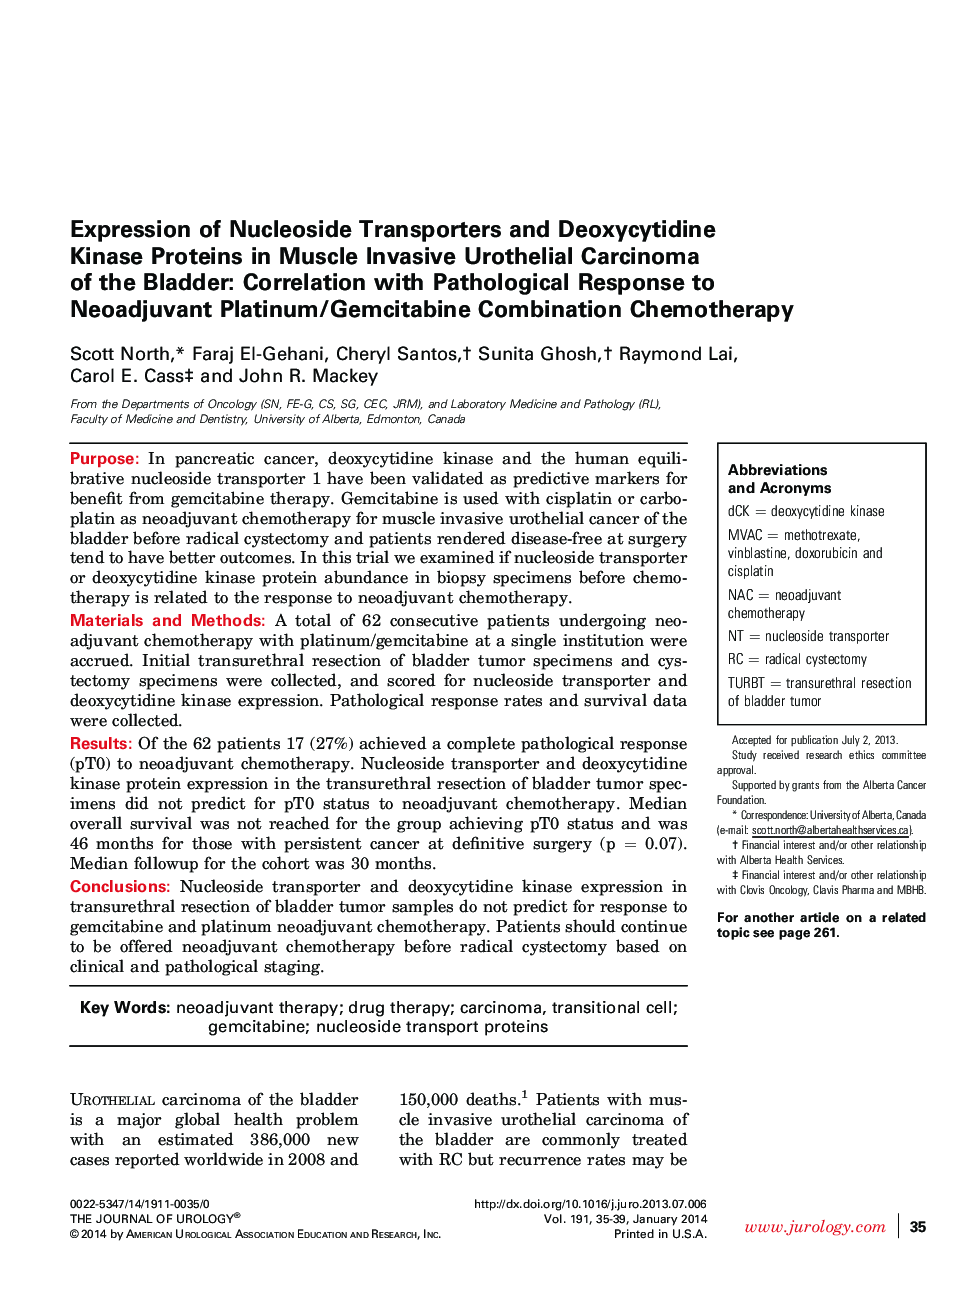 Expression of Nucleoside Transporters and Deoxycytidine Kinase Proteins in Muscle Invasive Urothelial Carcinoma of the Bladder: Correlation with Pathological Response to Neoadjuvant Platinum/Gemcitabine Combination Chemotherapy 